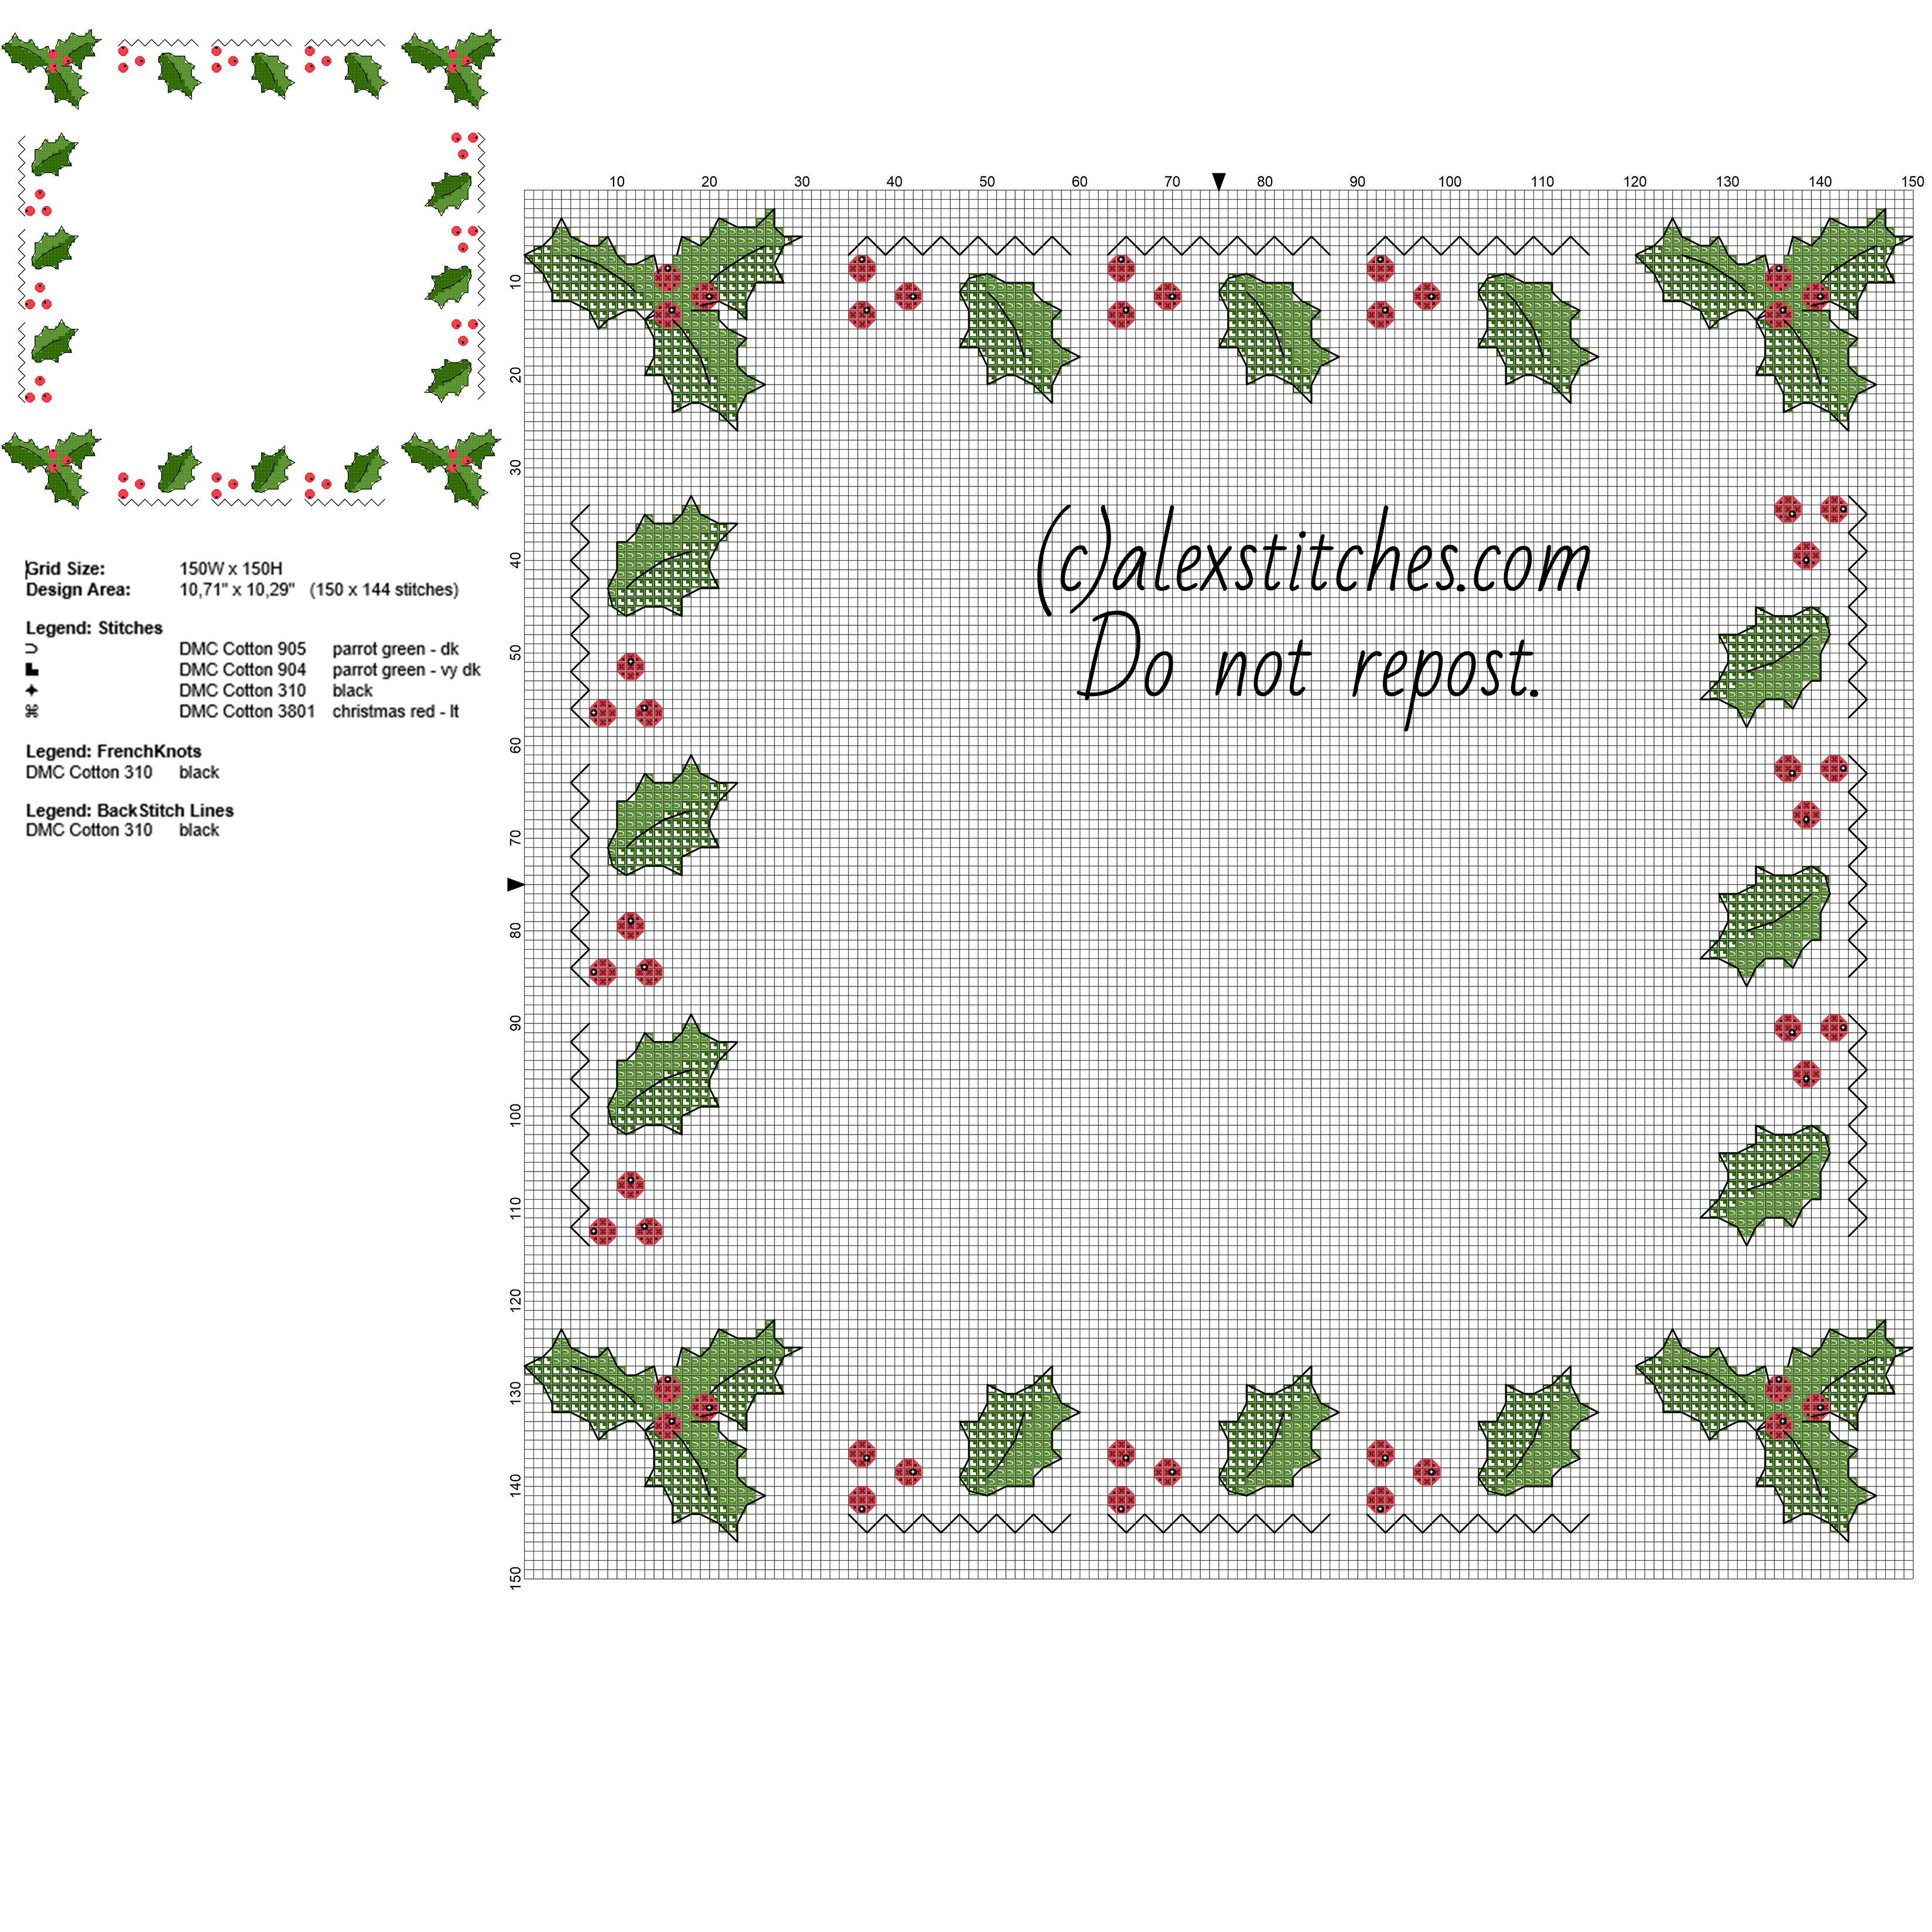 Cross stitch border with Christmas holly leaves free pcstitch pattern download